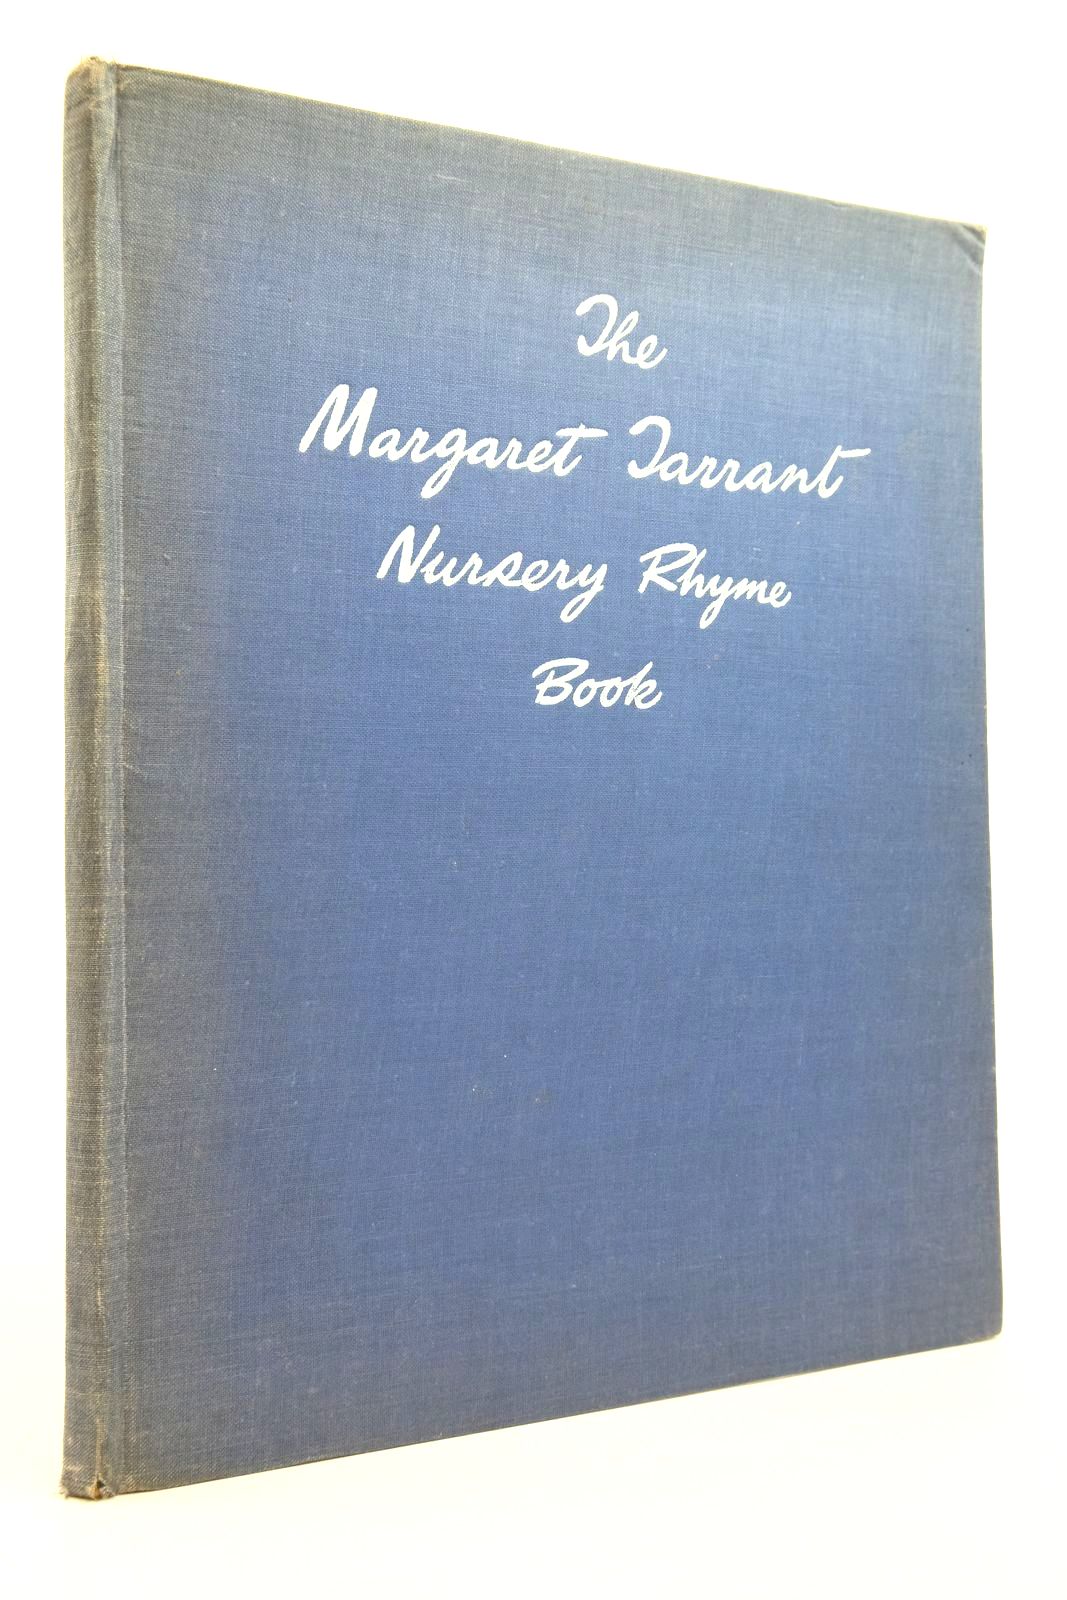 Photo of THE MARGARET TARRANT NURSERY RHYME BOOK- Stock Number: 2140075